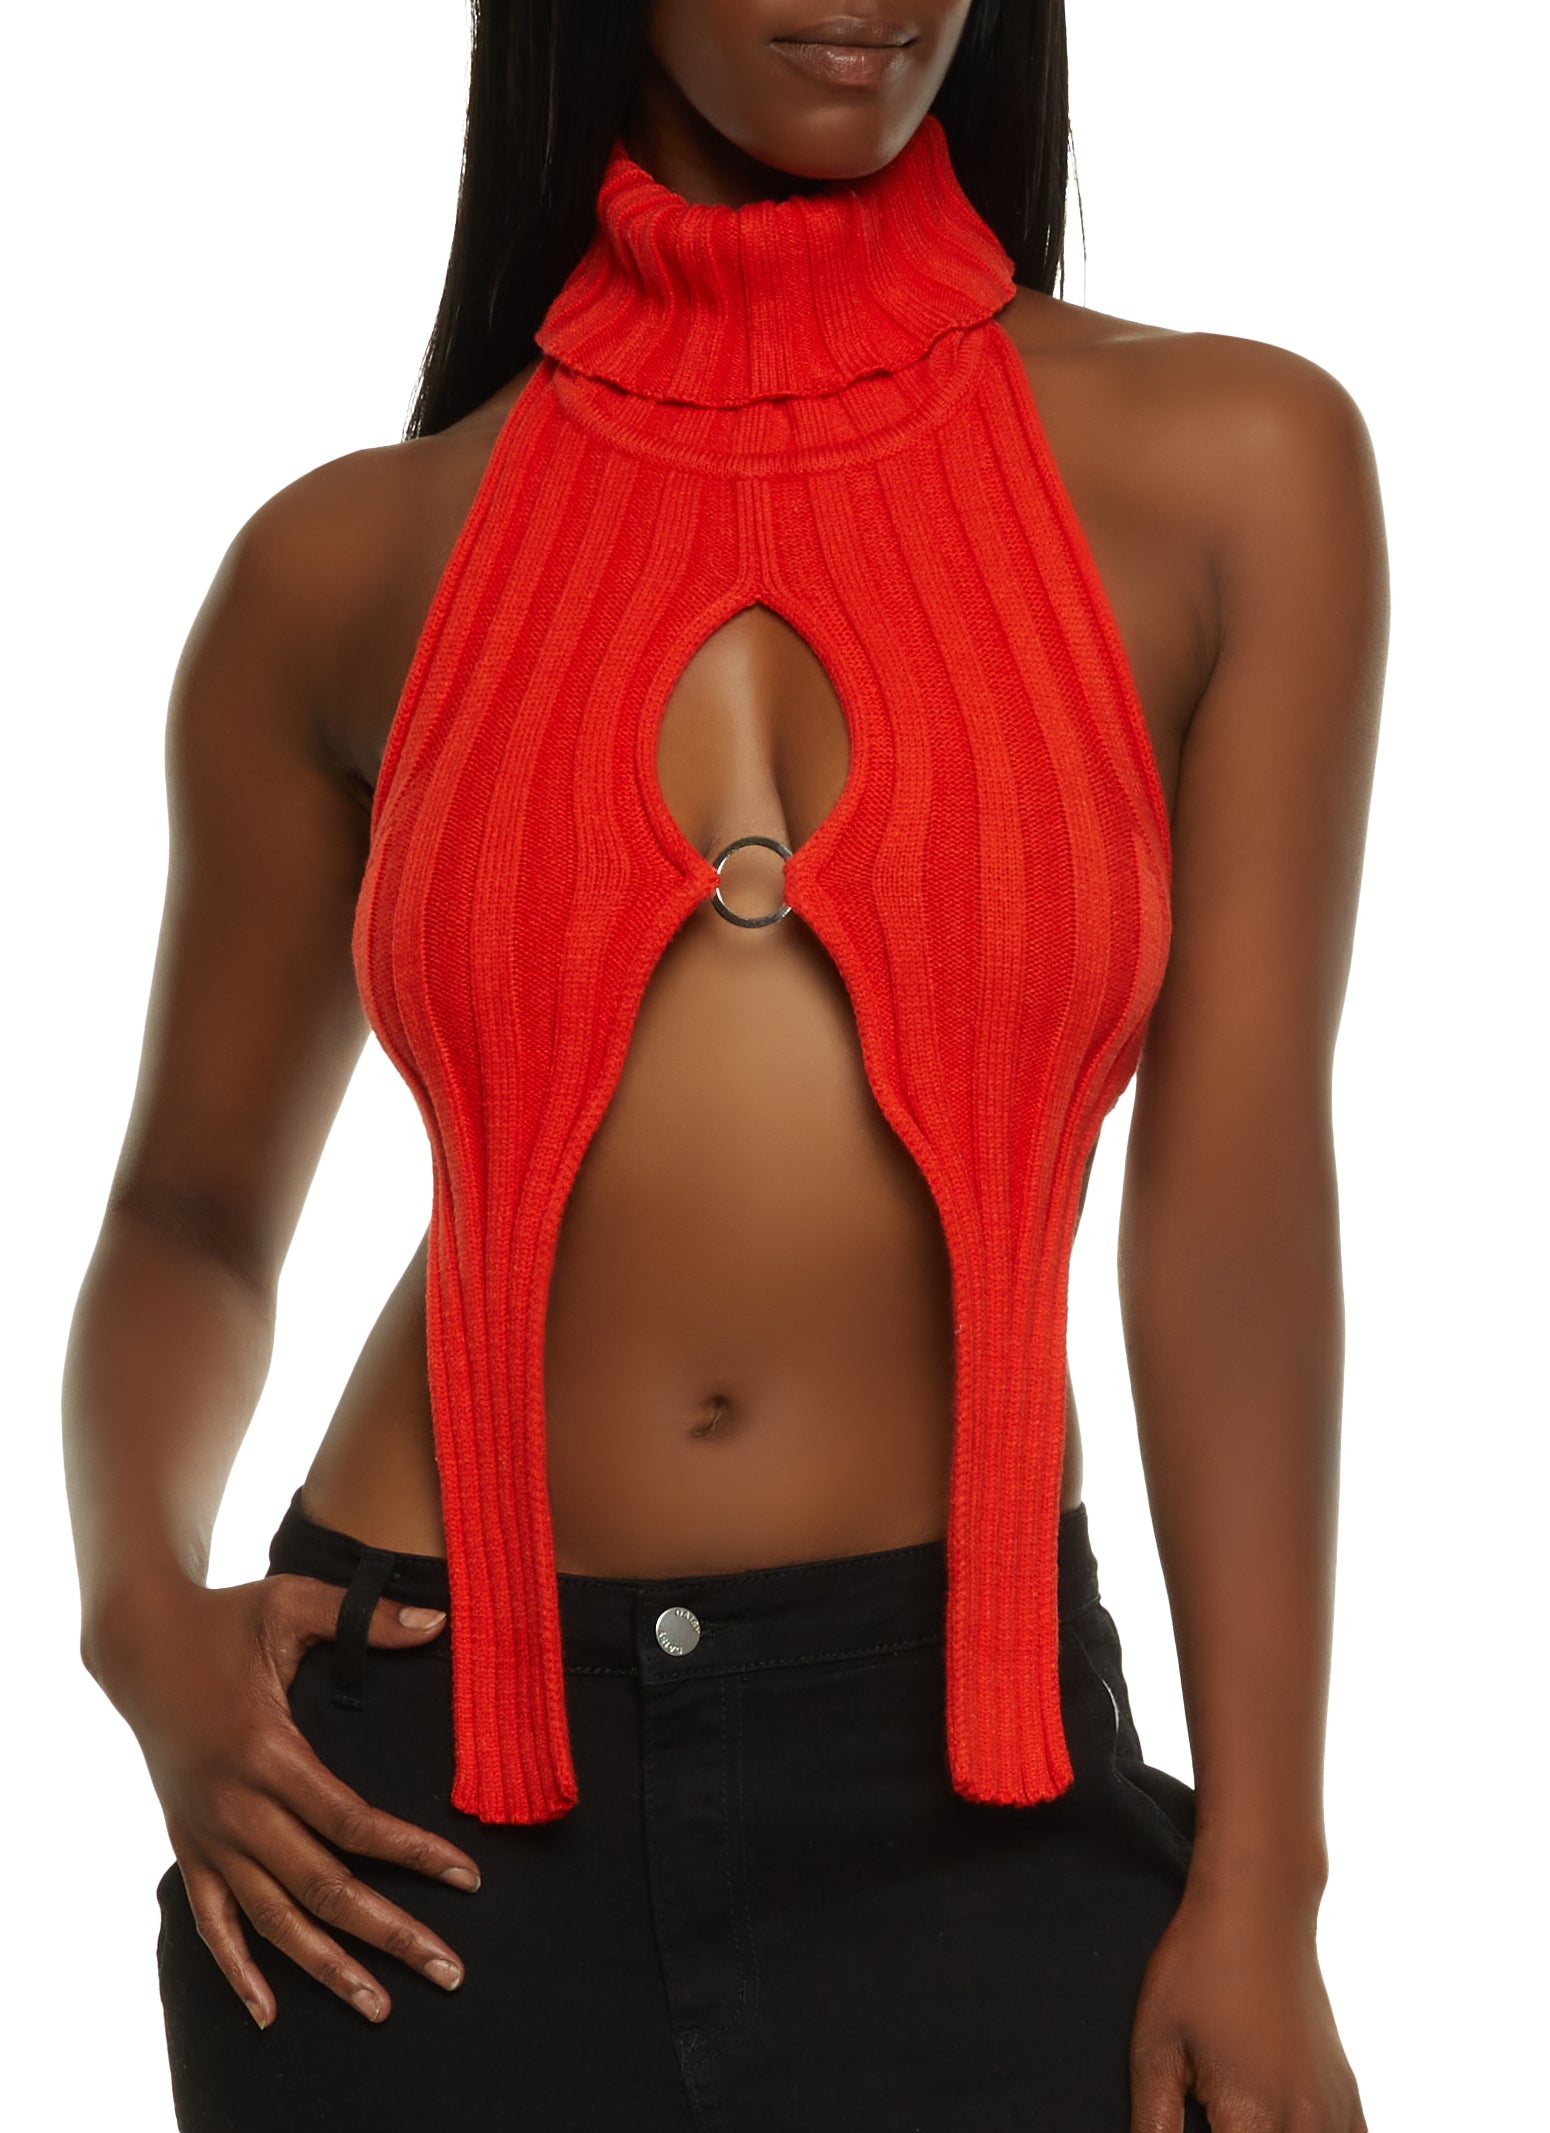 Halara NWT Ribbed Knit Zip Front Cut Out Cropped Training Tank Top Red XS -  $18 New With Tags - From Haley